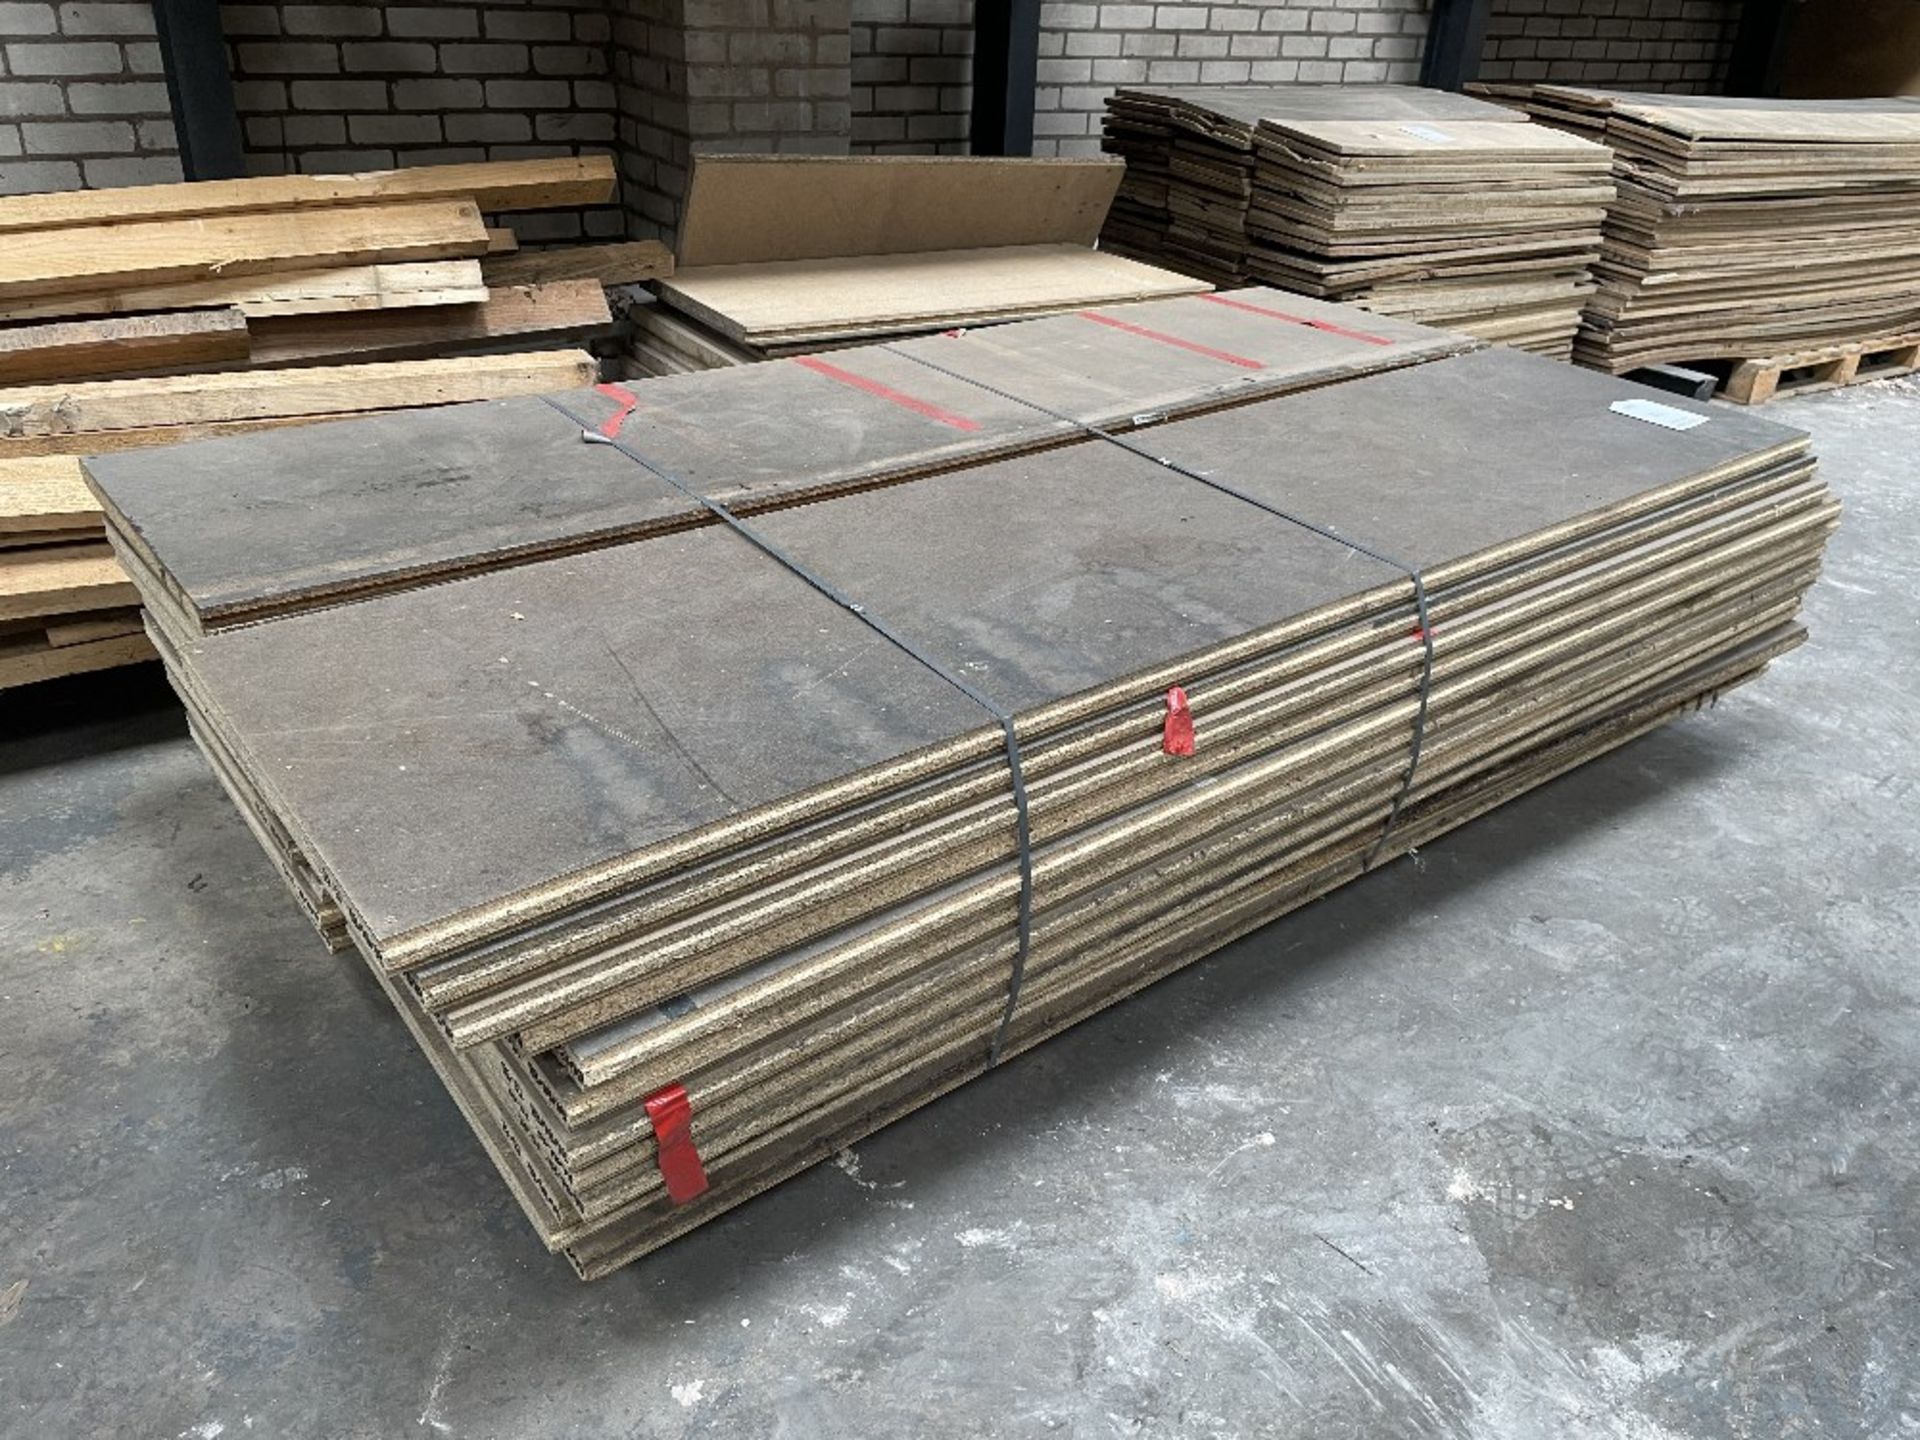 24 x Heavy Duty Tongue & Groove Chipboard Floorboards | 240cm x 60cm x 4cm - Image 3 of 5